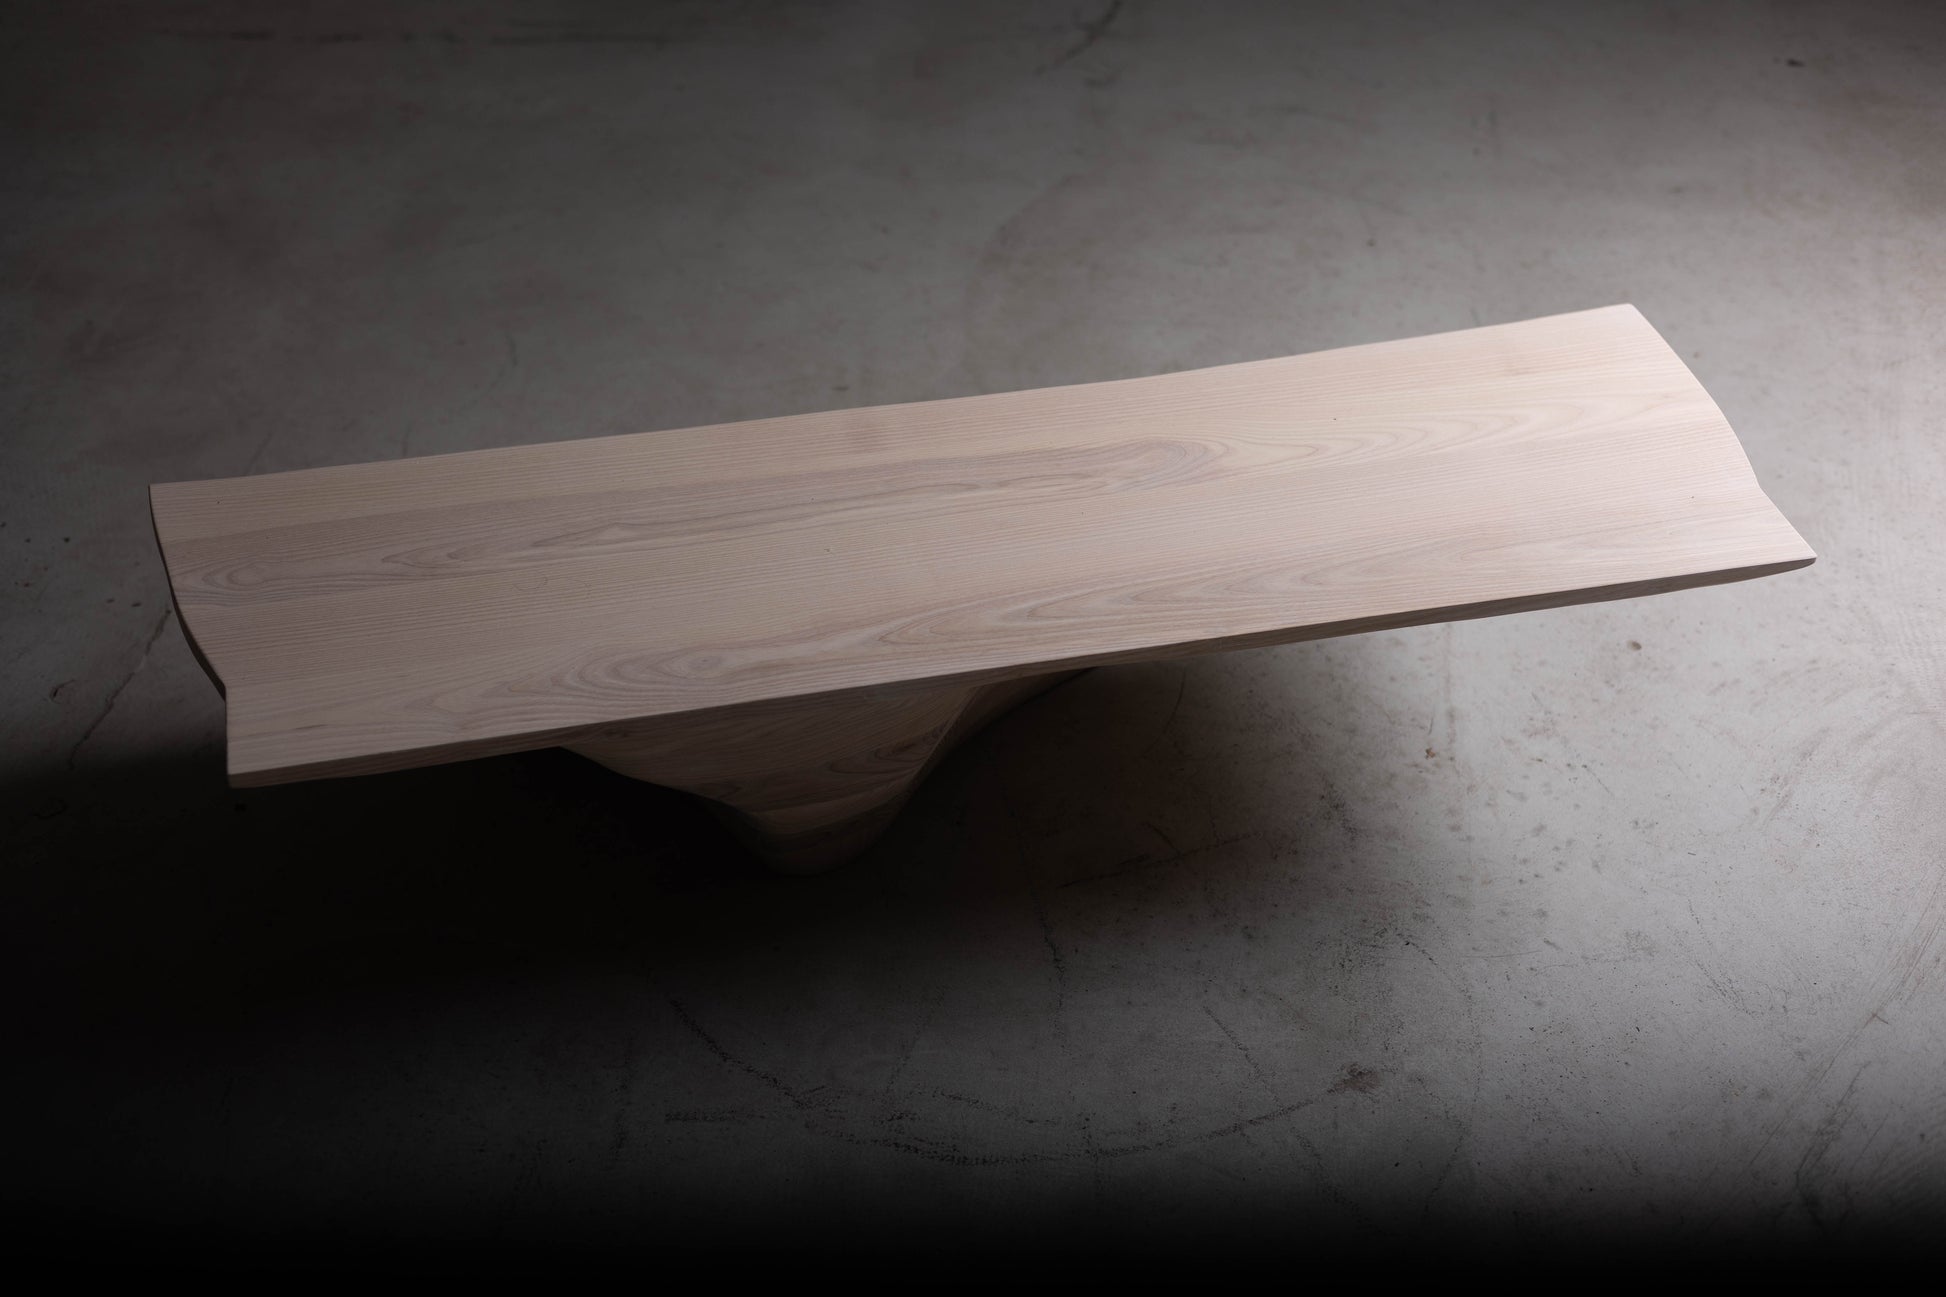 Sculptural Solid Wood Coffee Table EM111 Part Of Erosio Collection | Perspective image of the table top.